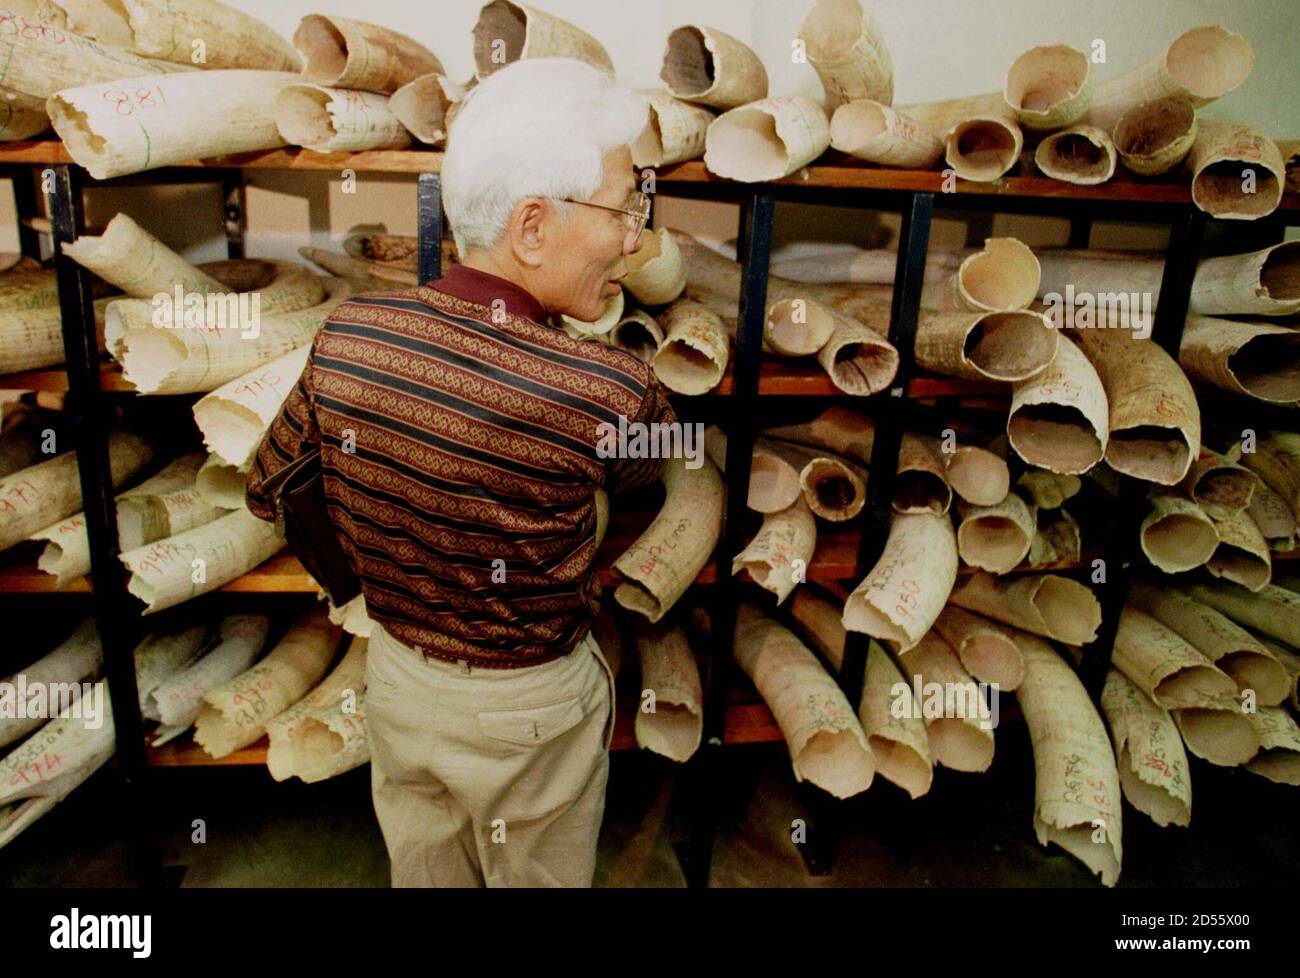 A Japanese buyer inspects elephant tusks in the Ivory Store at the country's National Parks Headquarters April 12. Zimbabwe will be holding its first auction of 20 Tonnes April 13 since the Convention for the International Trade in Endangered Species (CITES) downlisted elephant products from Appendix 1 to Appendix 2 for Namibia, Botswana and Zimbabwe. Japan is the only country permitted to import the ivory under the CITES regulations.  HB/AA Stock Photo